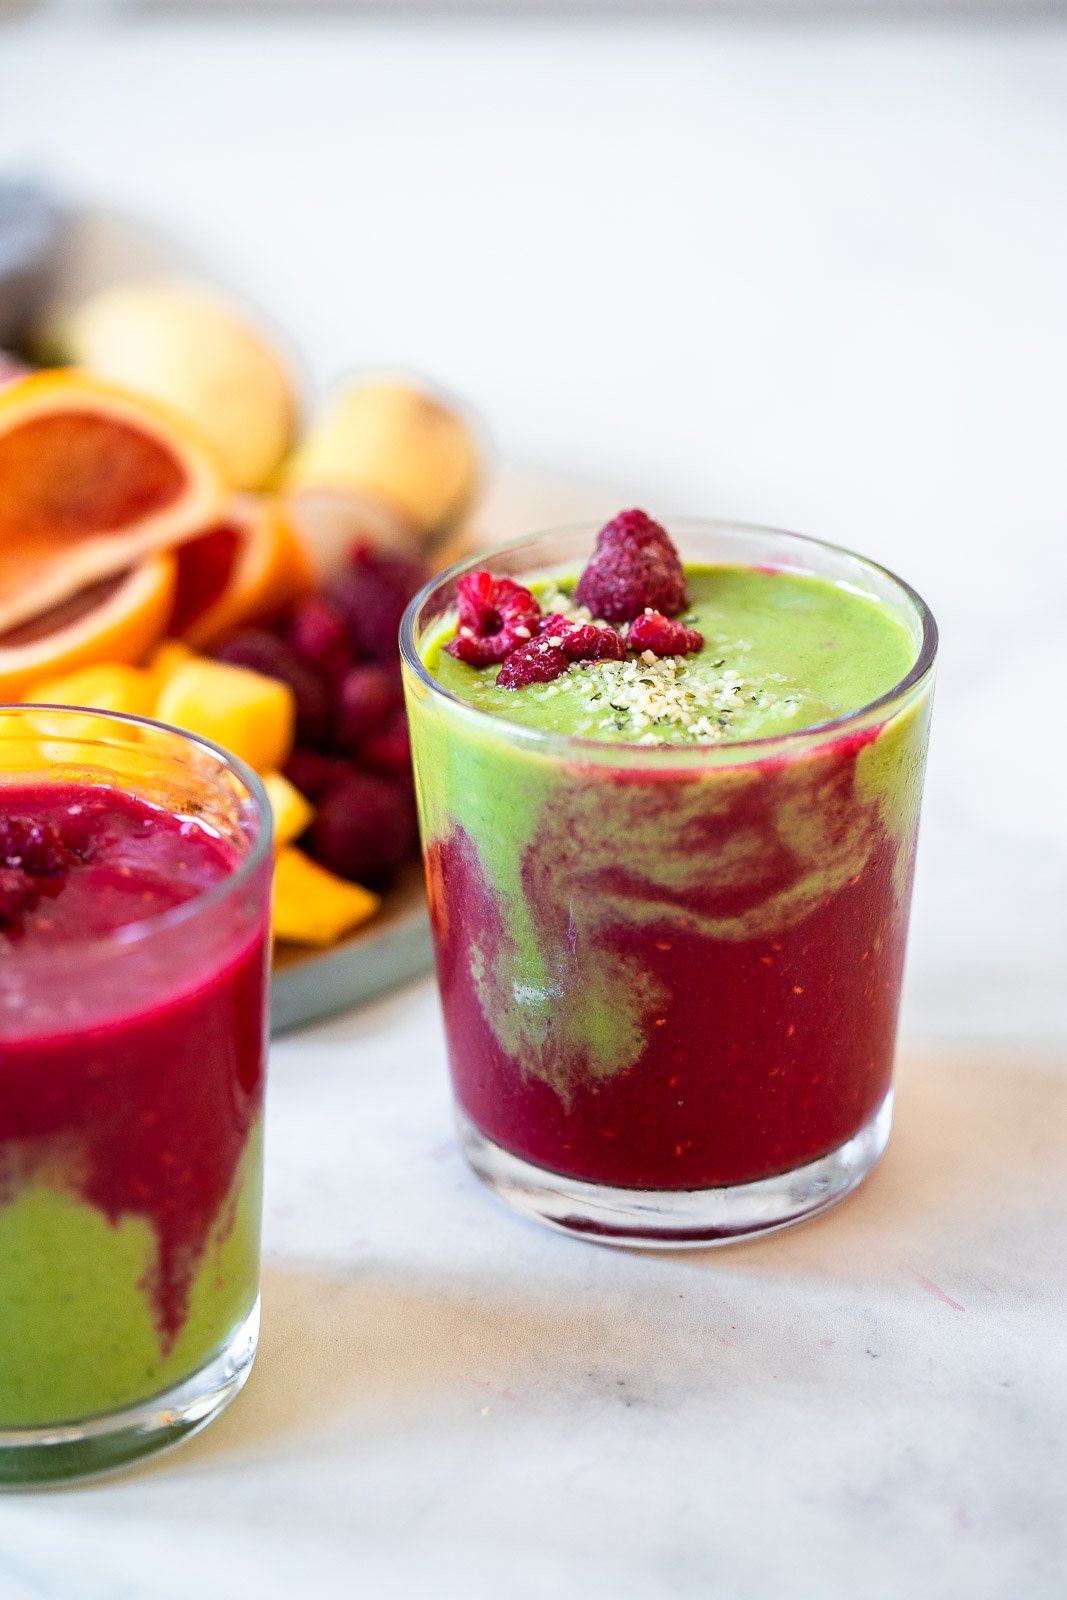 red and green layered smoothie in glass with fresh fruit.